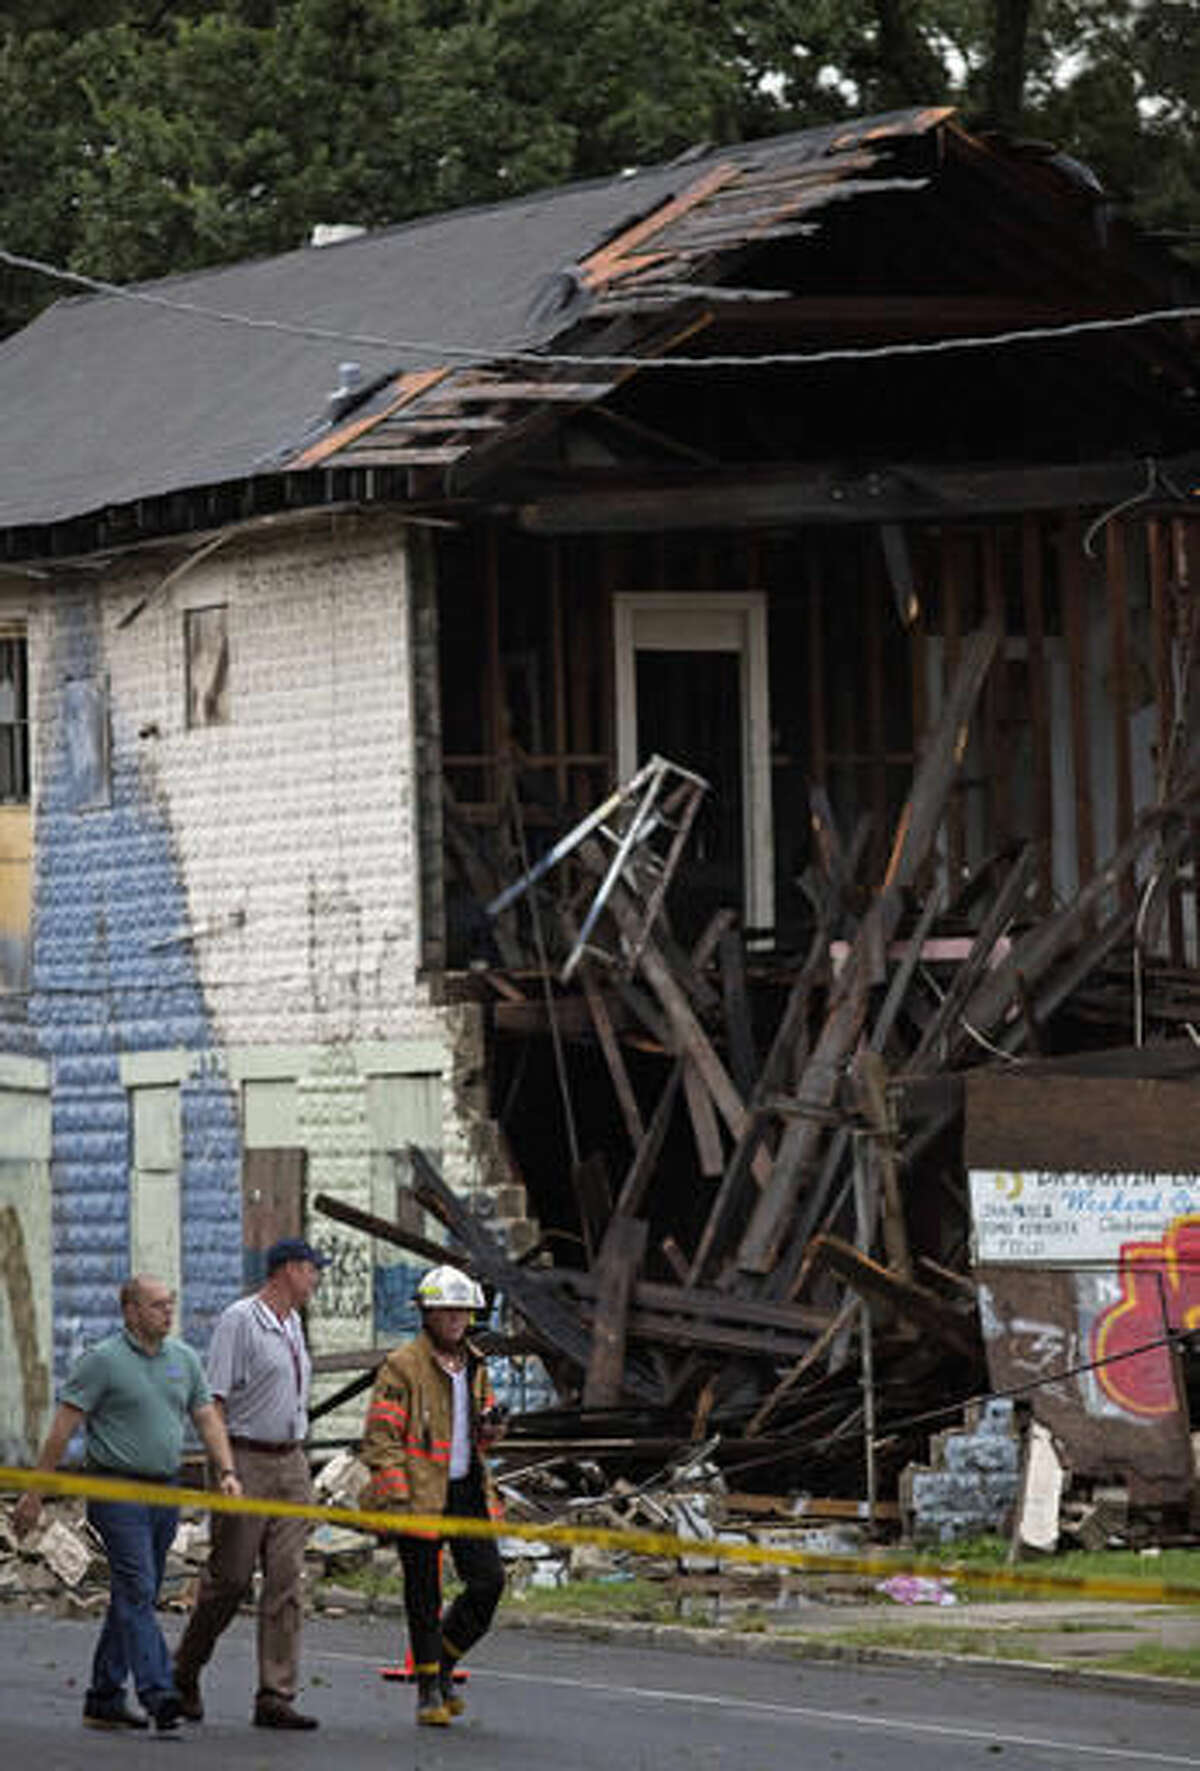 Emergency responders inspect a partially collapsed building on the corner of North Claiborne Avenue and Ursulines Avenue after heavy rains and powerful winds hit New Orleans on Thursday, Aug. 4, 2016. A brief but intense storm pummeled New Orleans on Thursday afternoon, toppling trees and power lines and collapsing at least two abandoned houses. (AP Photo/Max Becherer)